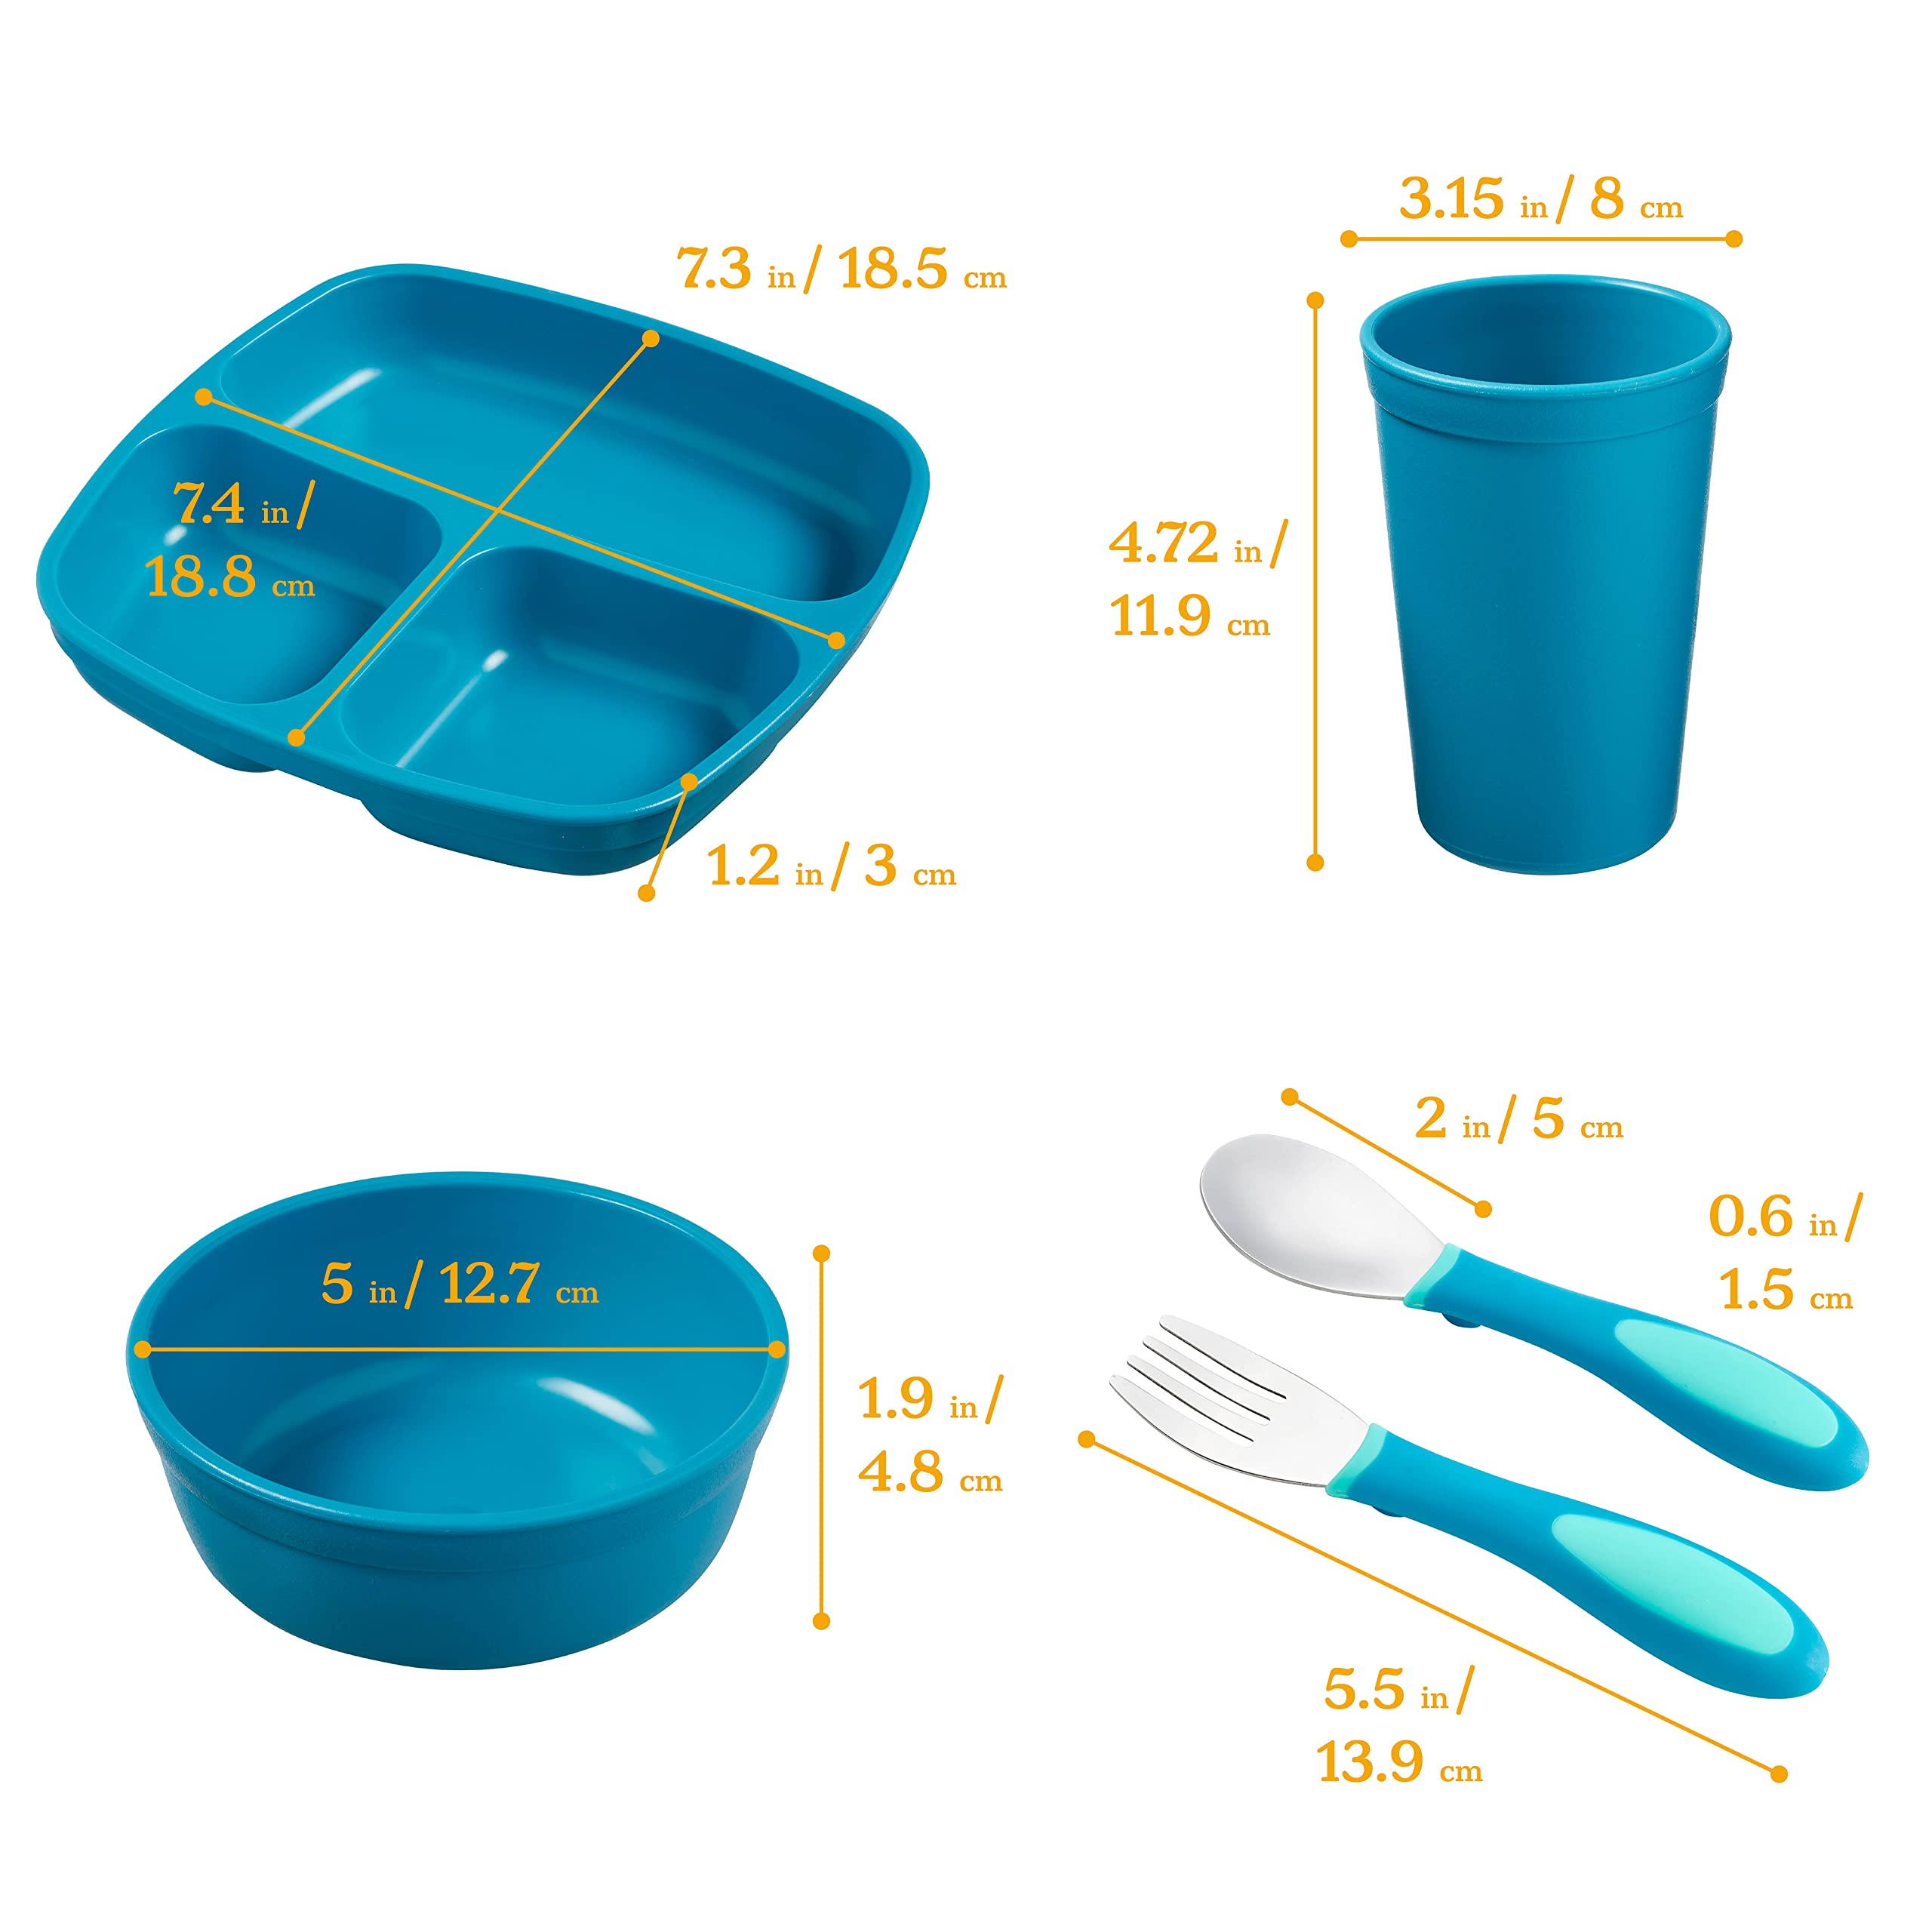 ECR4Kids My First Meal Pal Combo Set, Kids Plastic Tableware and Utensils, Children's Divided Plates, Bowls, Cups, Stainless Steel Spoons and Forks, Stackable and Dishwasher Safe, 15-Piece - Teal